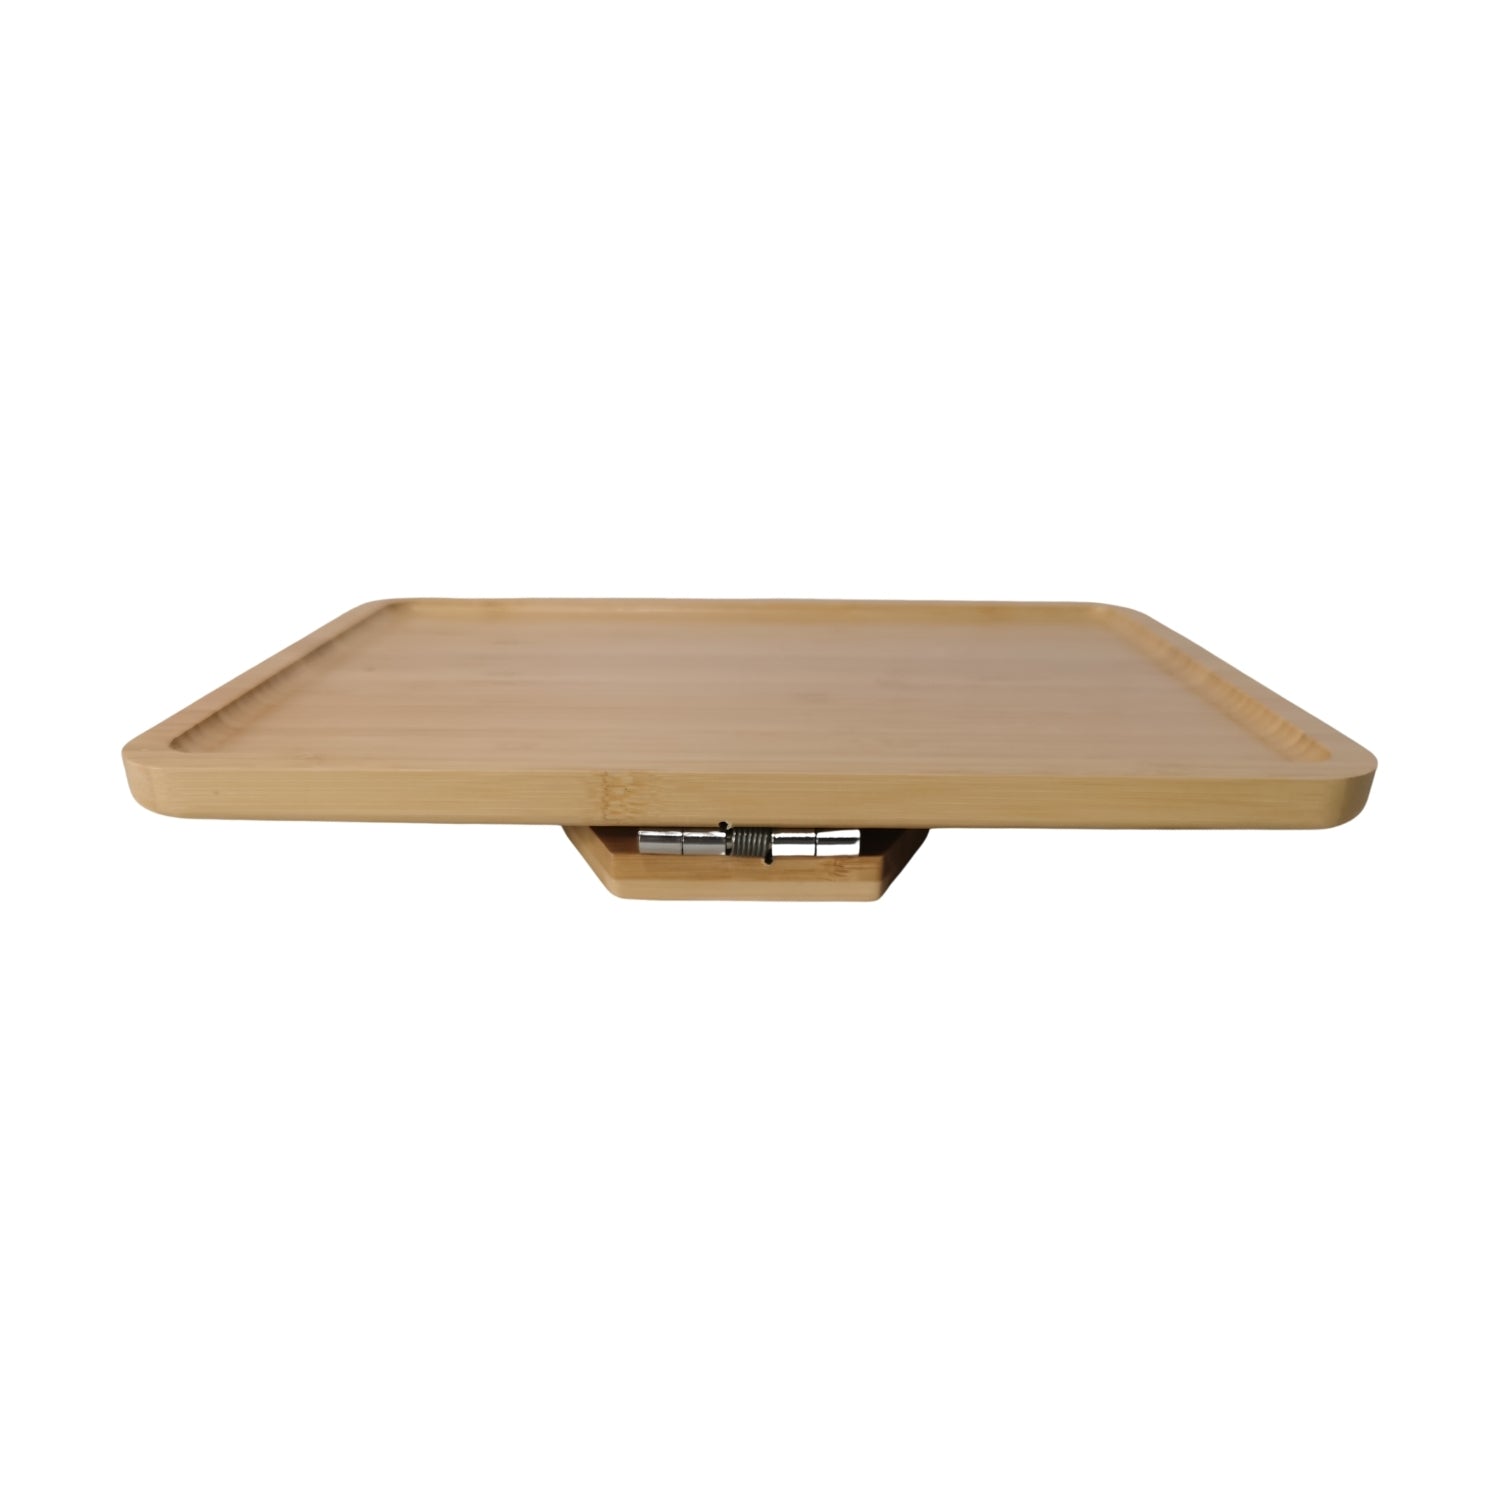 GOMINIMO Portable Sofa Arm Tray For Wide Couches(Natural)